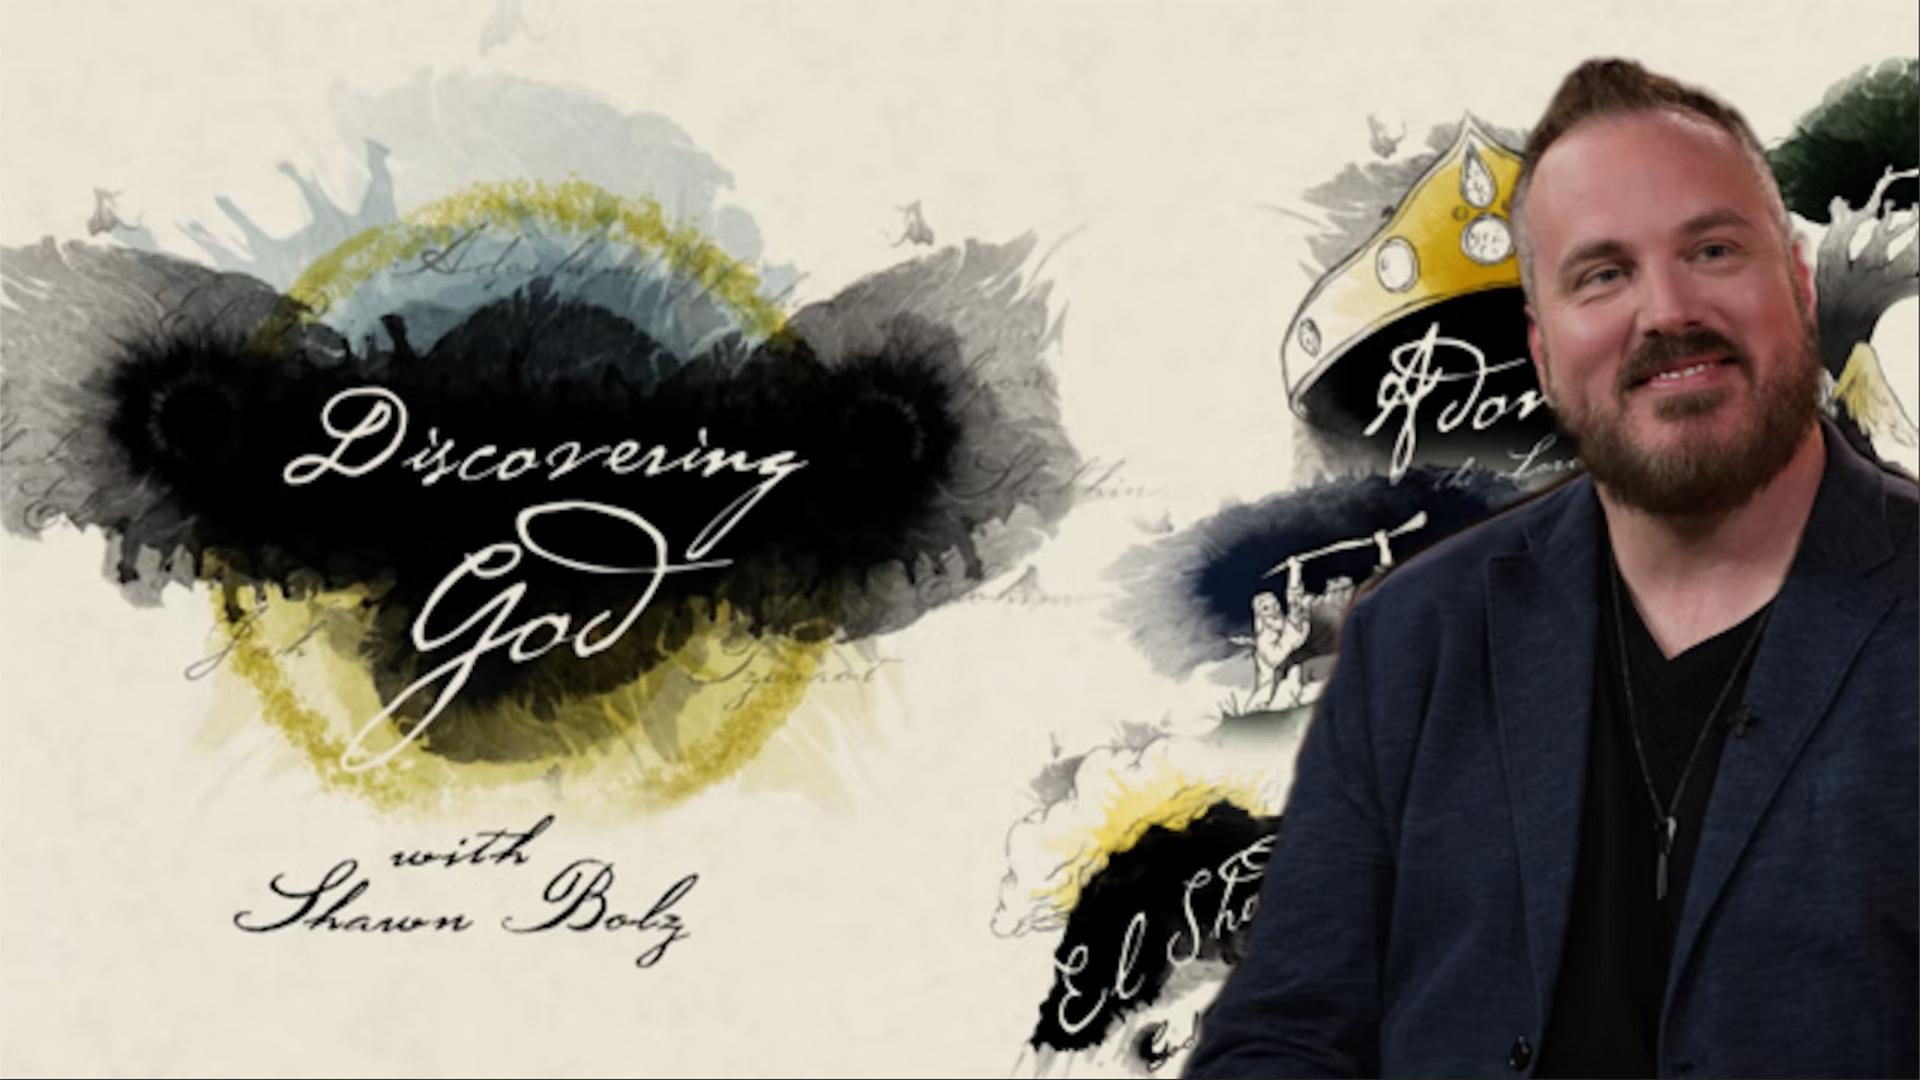 Discovering God with Shawn Bolz